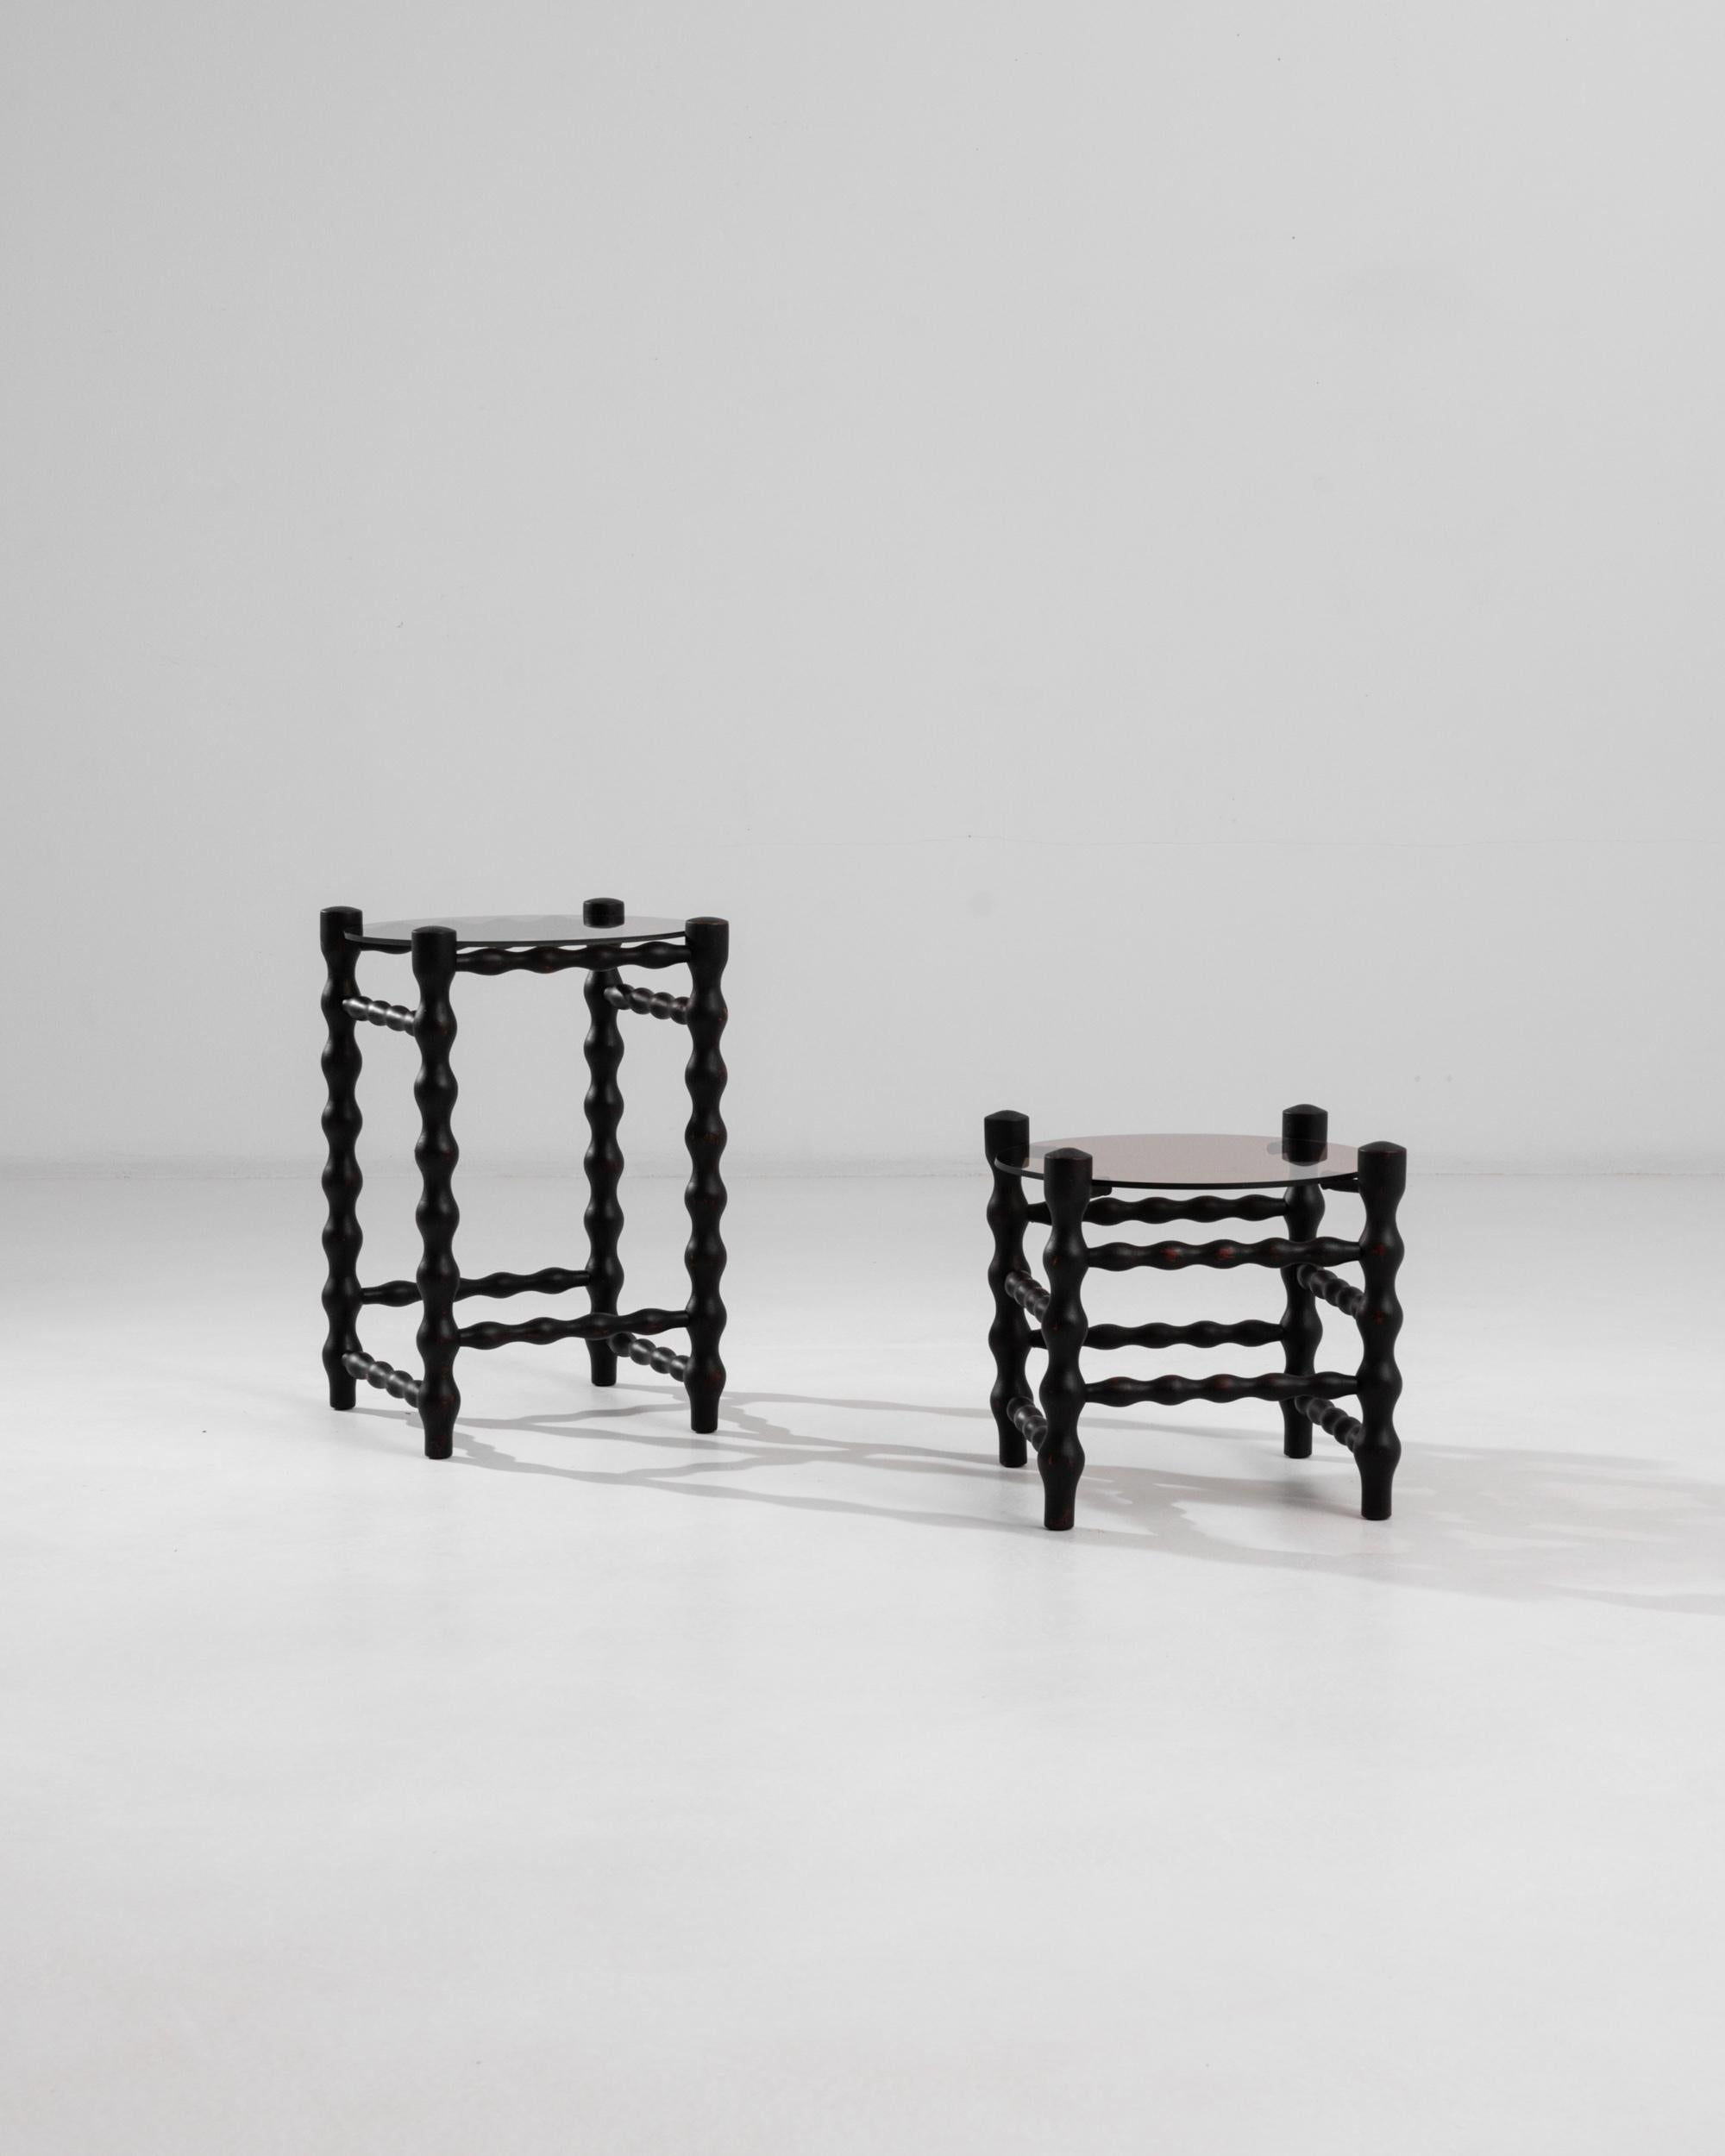 These vintage Czech side tables translate barley twist aesthetics into a modern language. The smoothed outlines of the spiral legs and side stretchers endow these pieces with an avant garde quality. The black finish elegantly dialogues with the